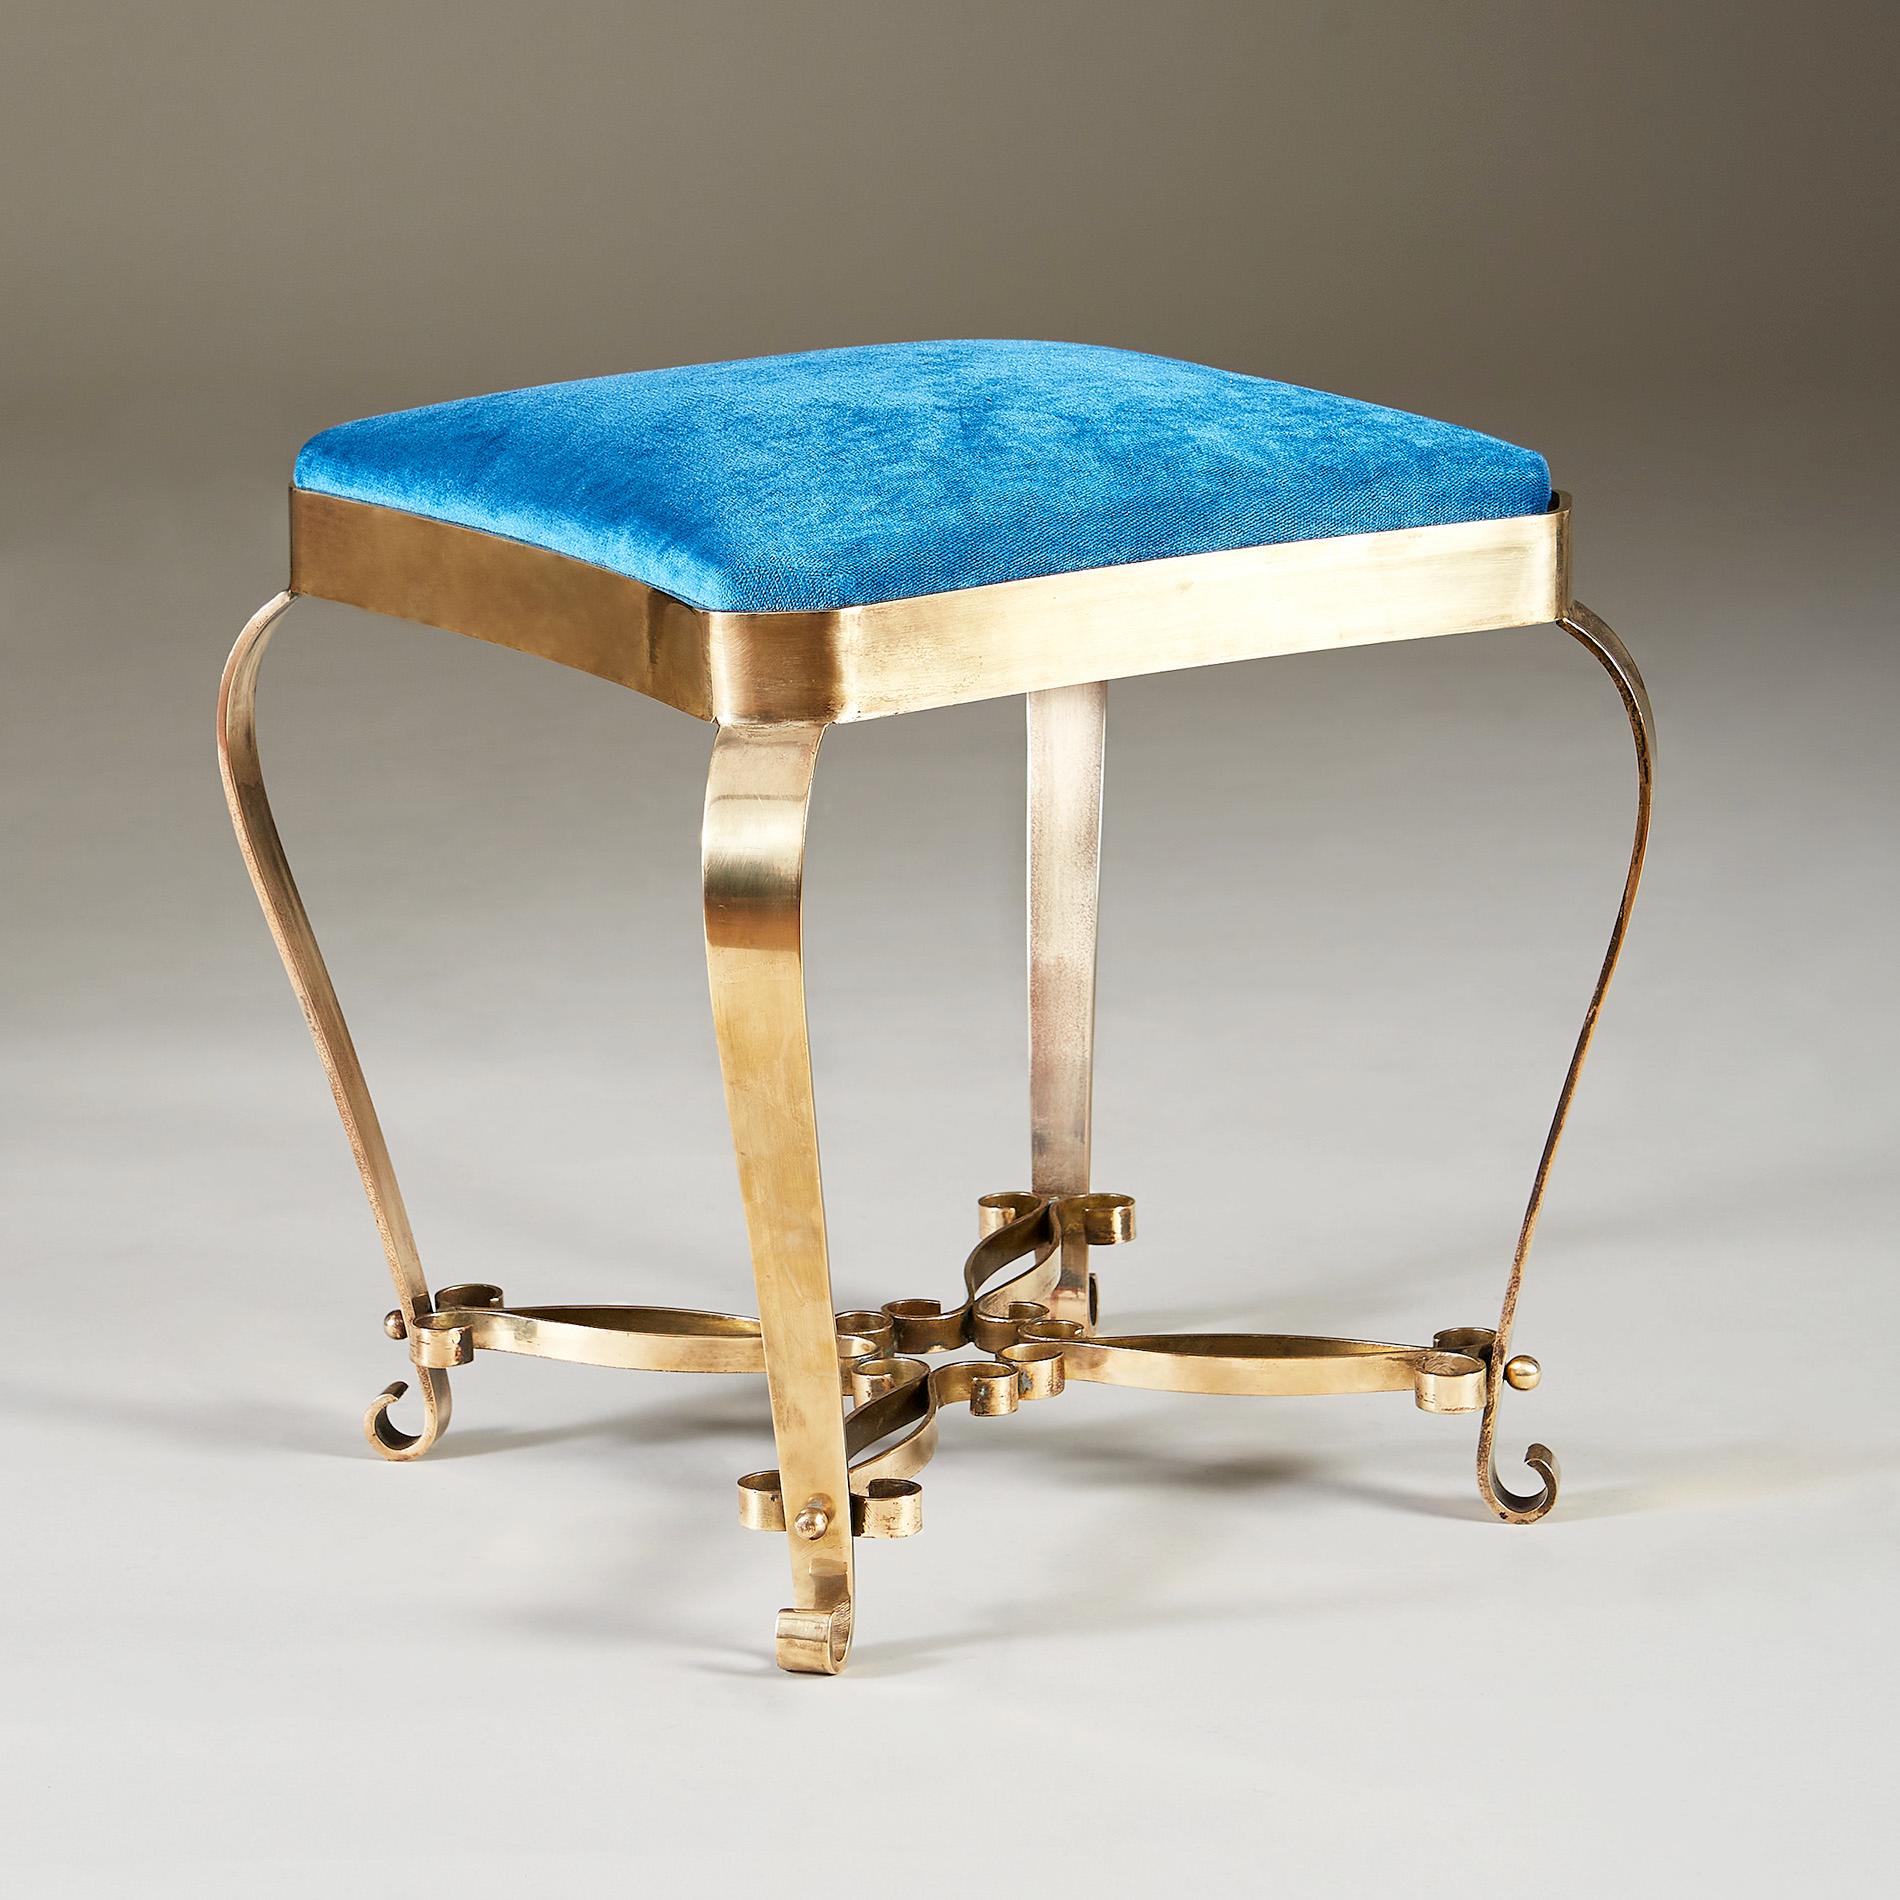 Elegant vintage dressing-table/occasional stool with decorative brass scroll detailing to legs and frame. The frame is held by four curved brass supports meeting as a decorative flower of small brass circles. Recently re-upholstered in turquoise